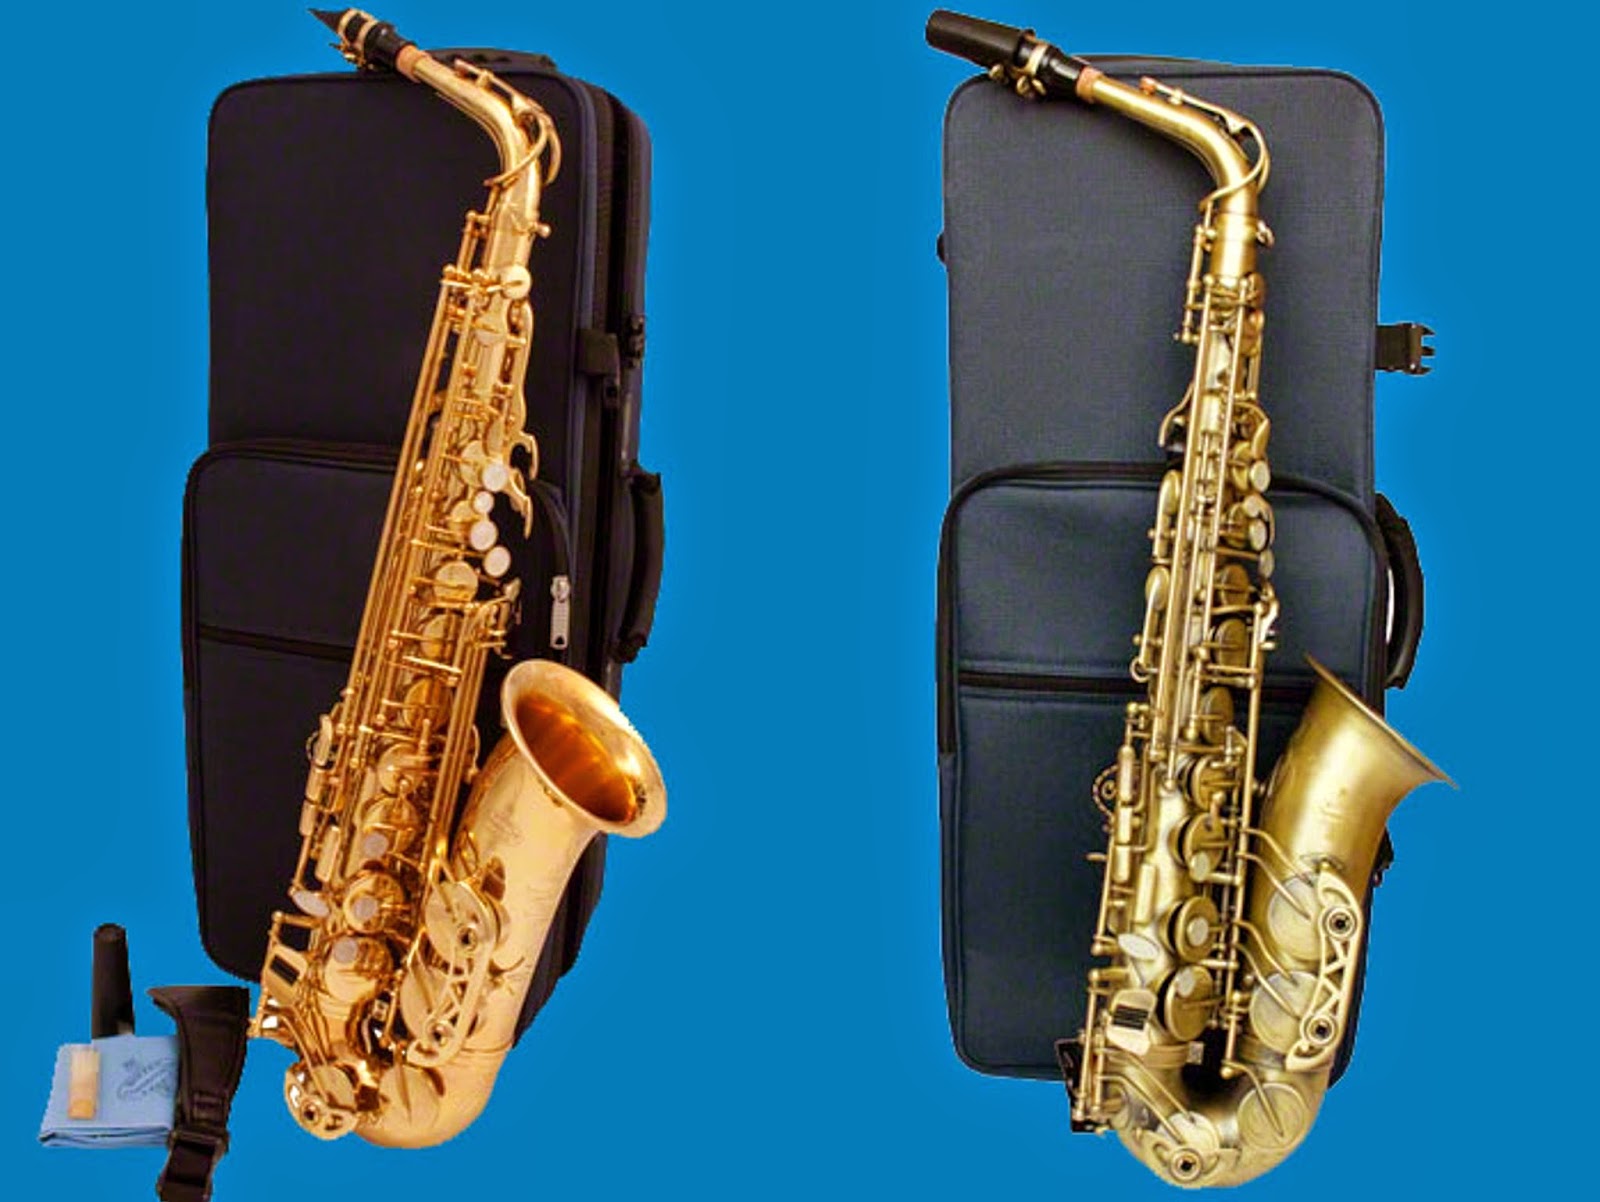 What is the difference between alto and tenor sax?